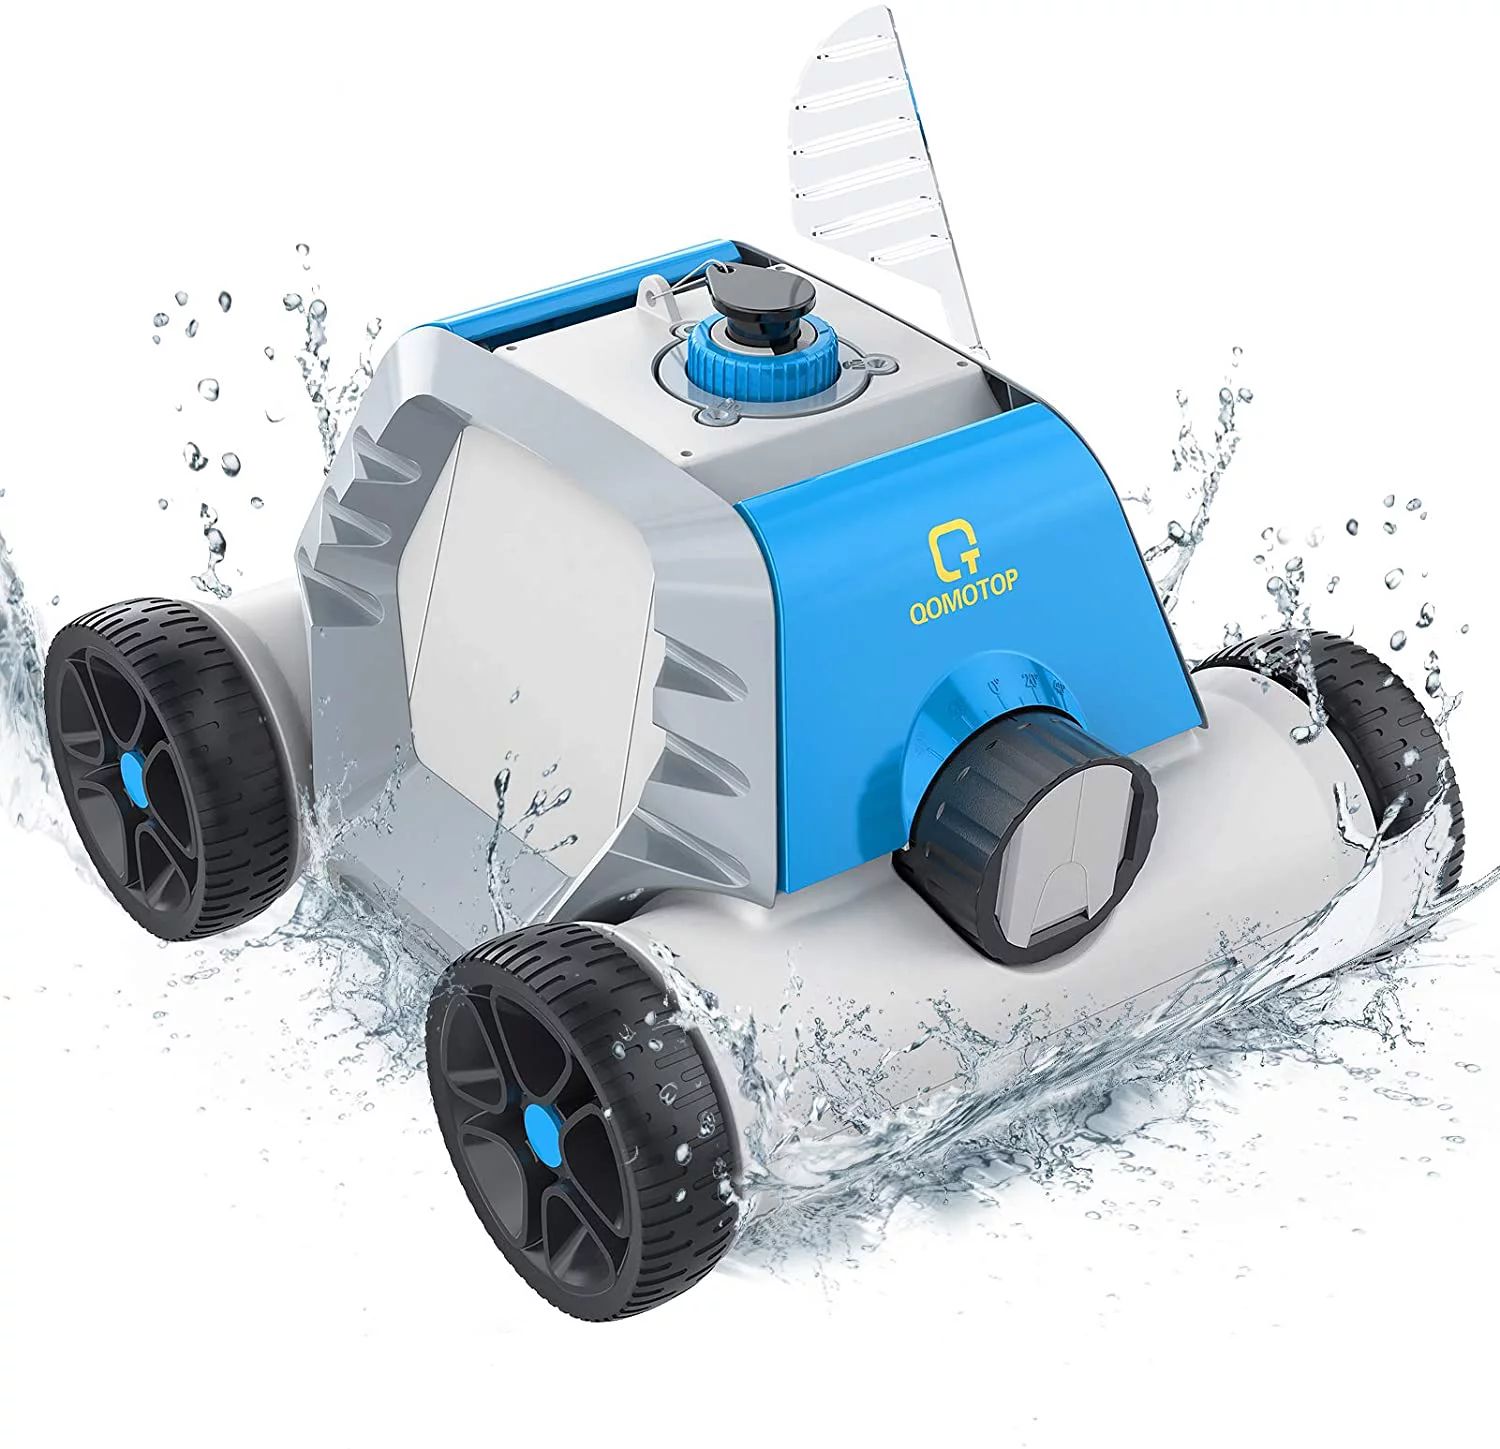 QOMOTOP Robotic Pool Cleaner, Cordless Automatic Pool Cleaner with 5000mAh Rechargeable Battery, ... | Walmart (US)